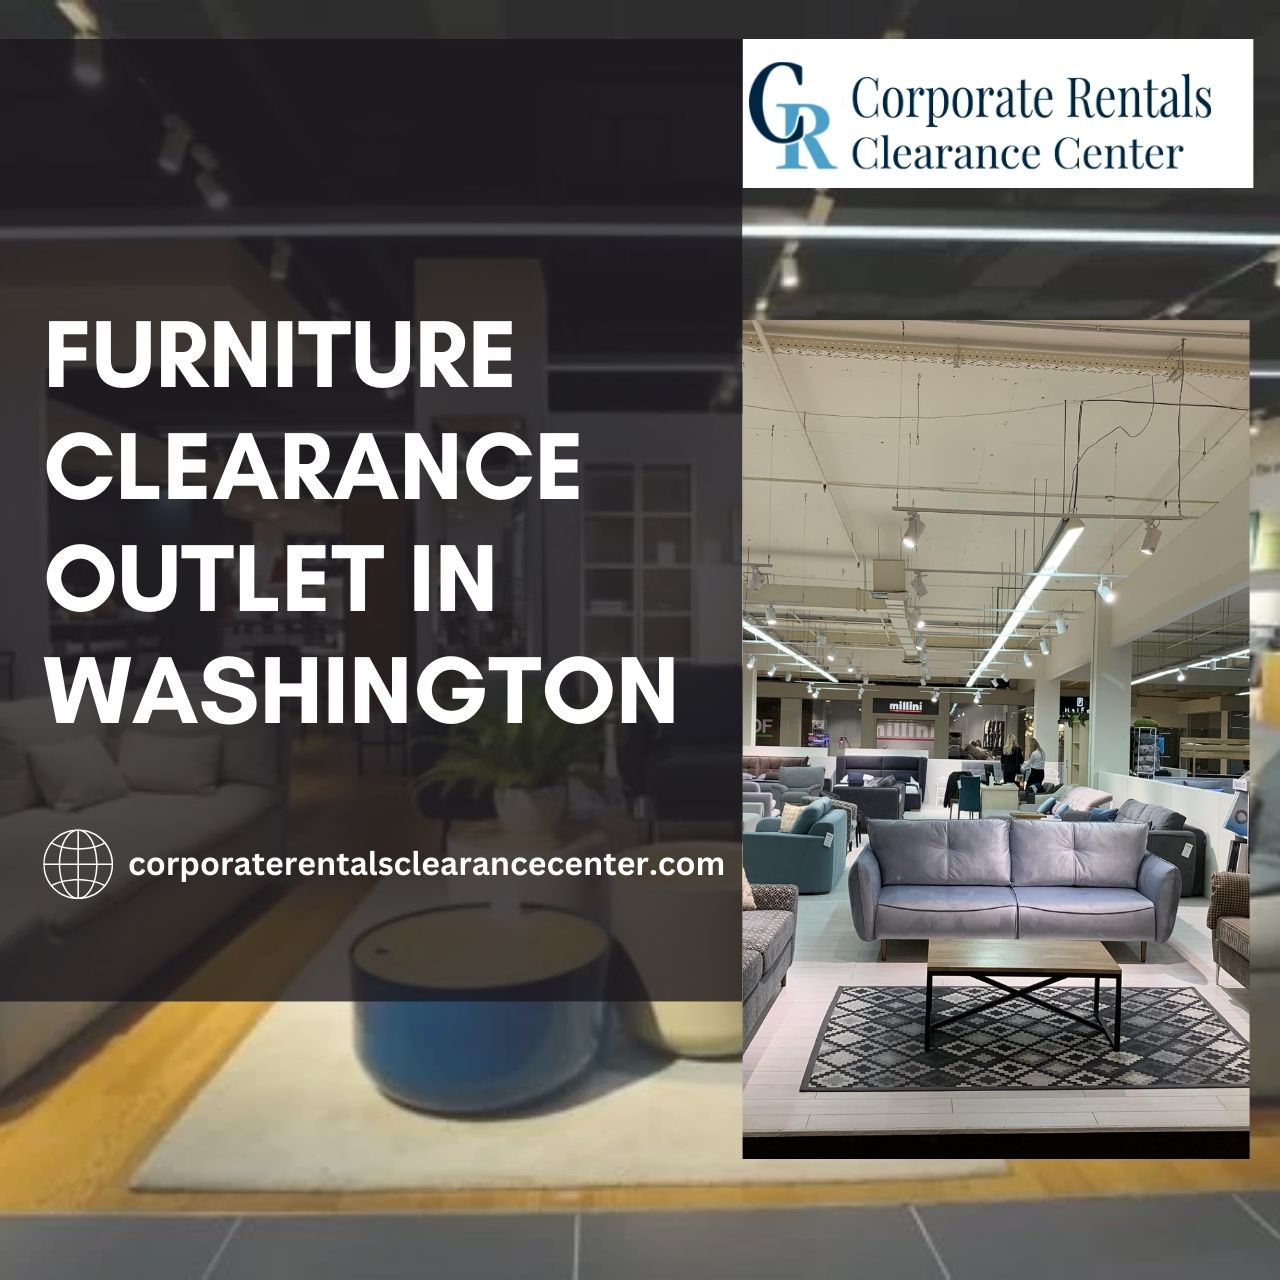 Furniture Clearance Outlet in Washington